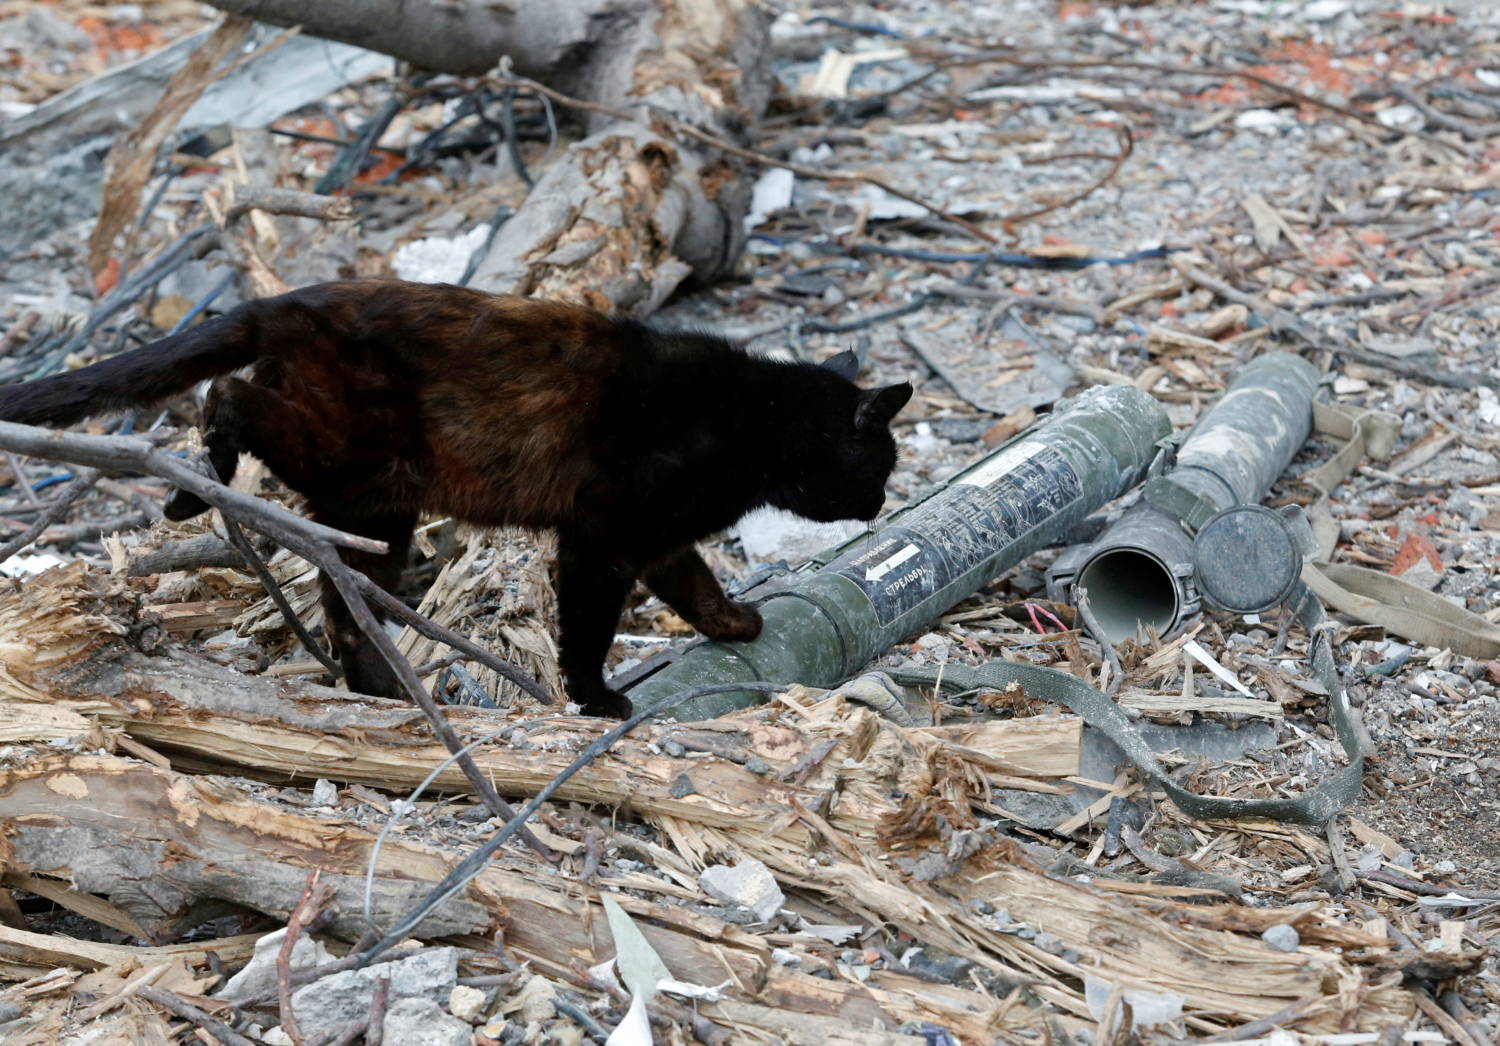 A Cat Walks On Used Disposable Rocket Launchers In Mariupol